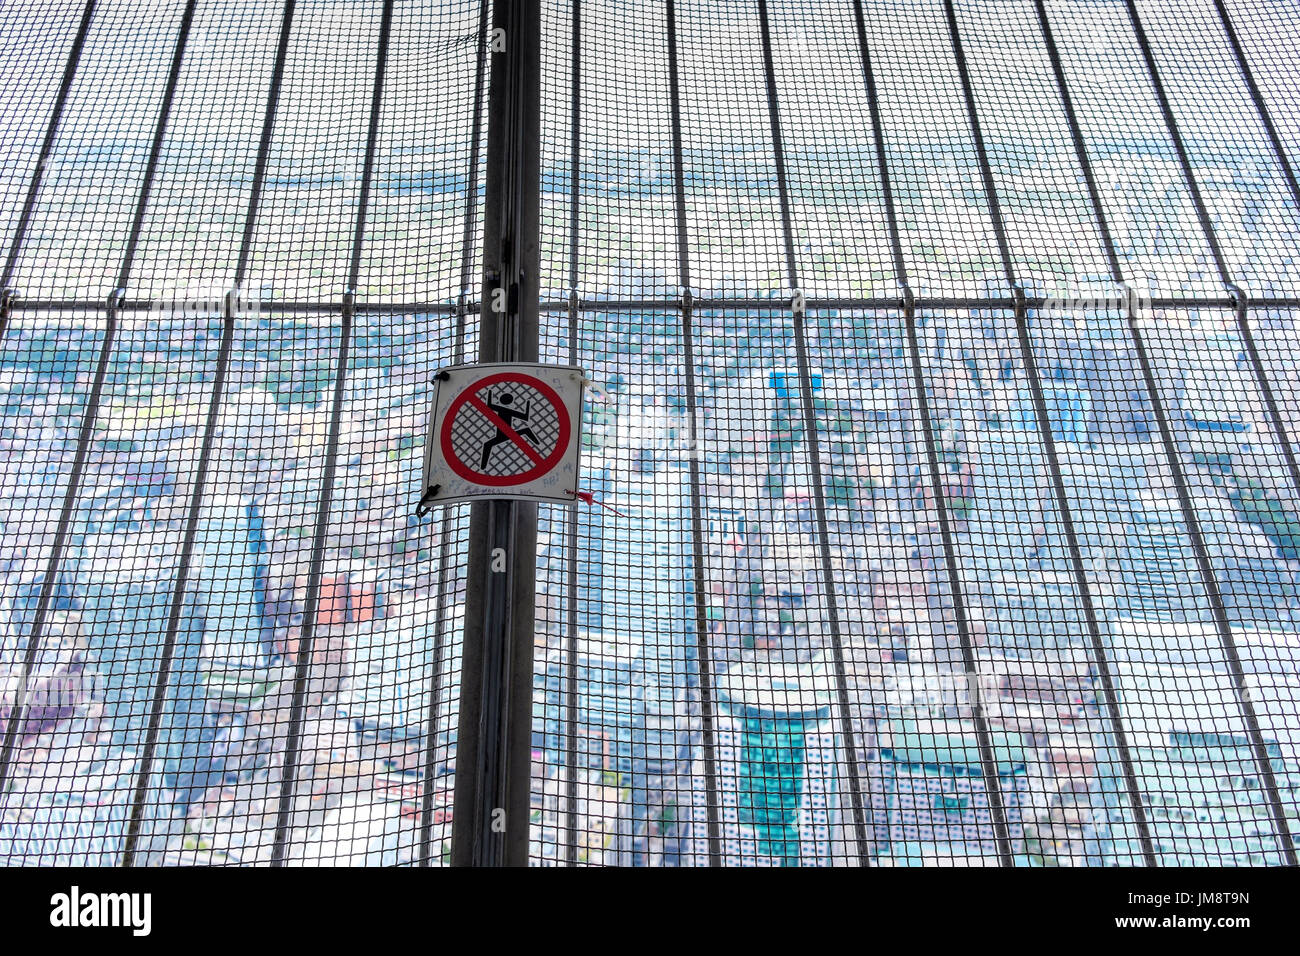 Warning Do Not Climb or Climbing Prohibited sign ideogram ideogramme on metal mesh, CN Tower viewing platform. Downtown Toronto is seen through mesh. Stock Photo